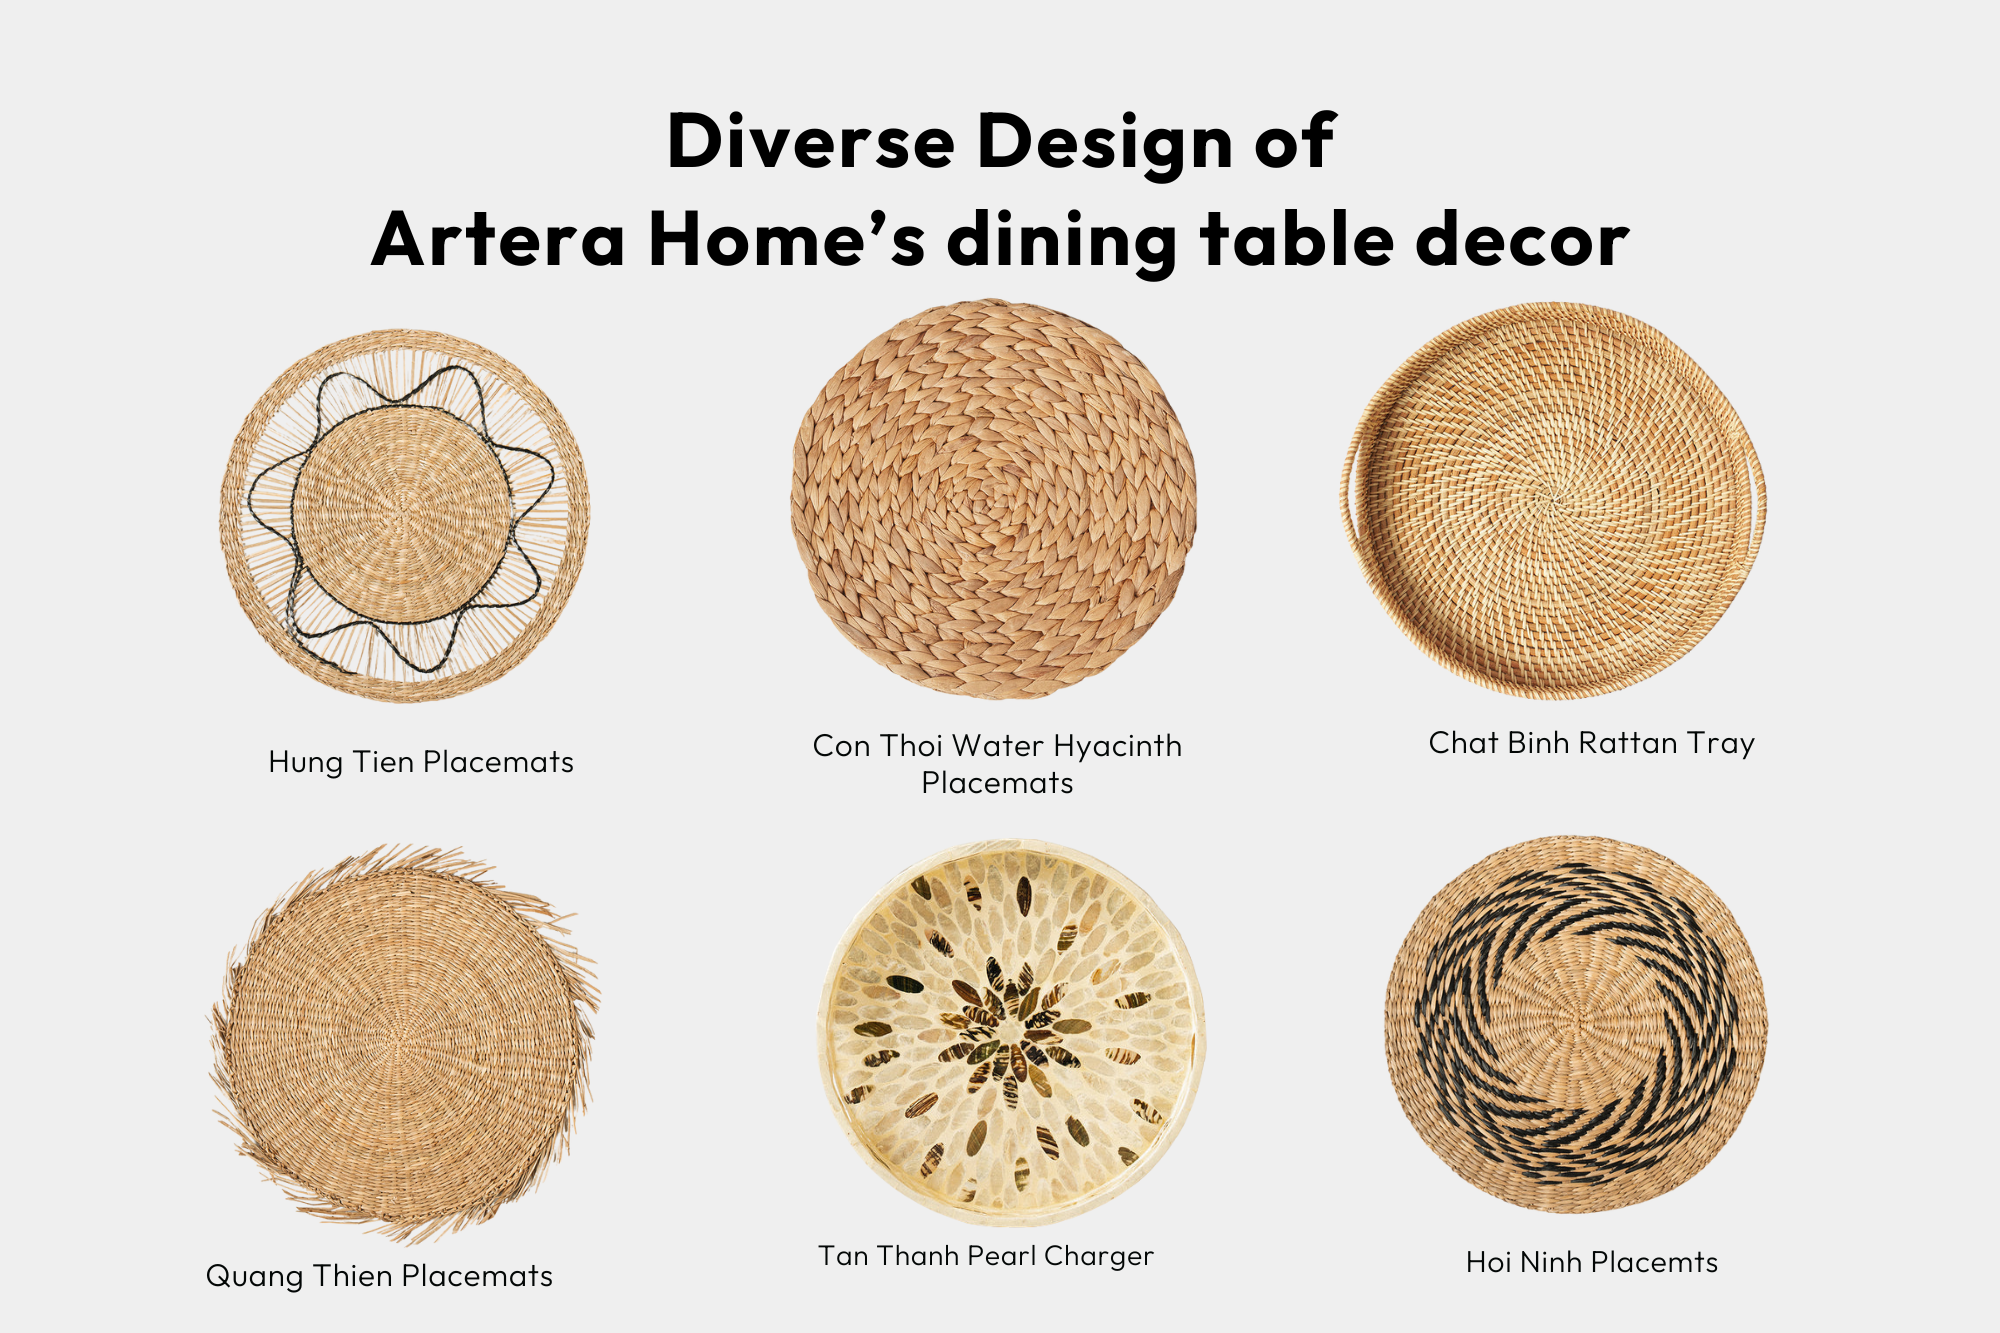 Wholesale dining table decor from Artera Home